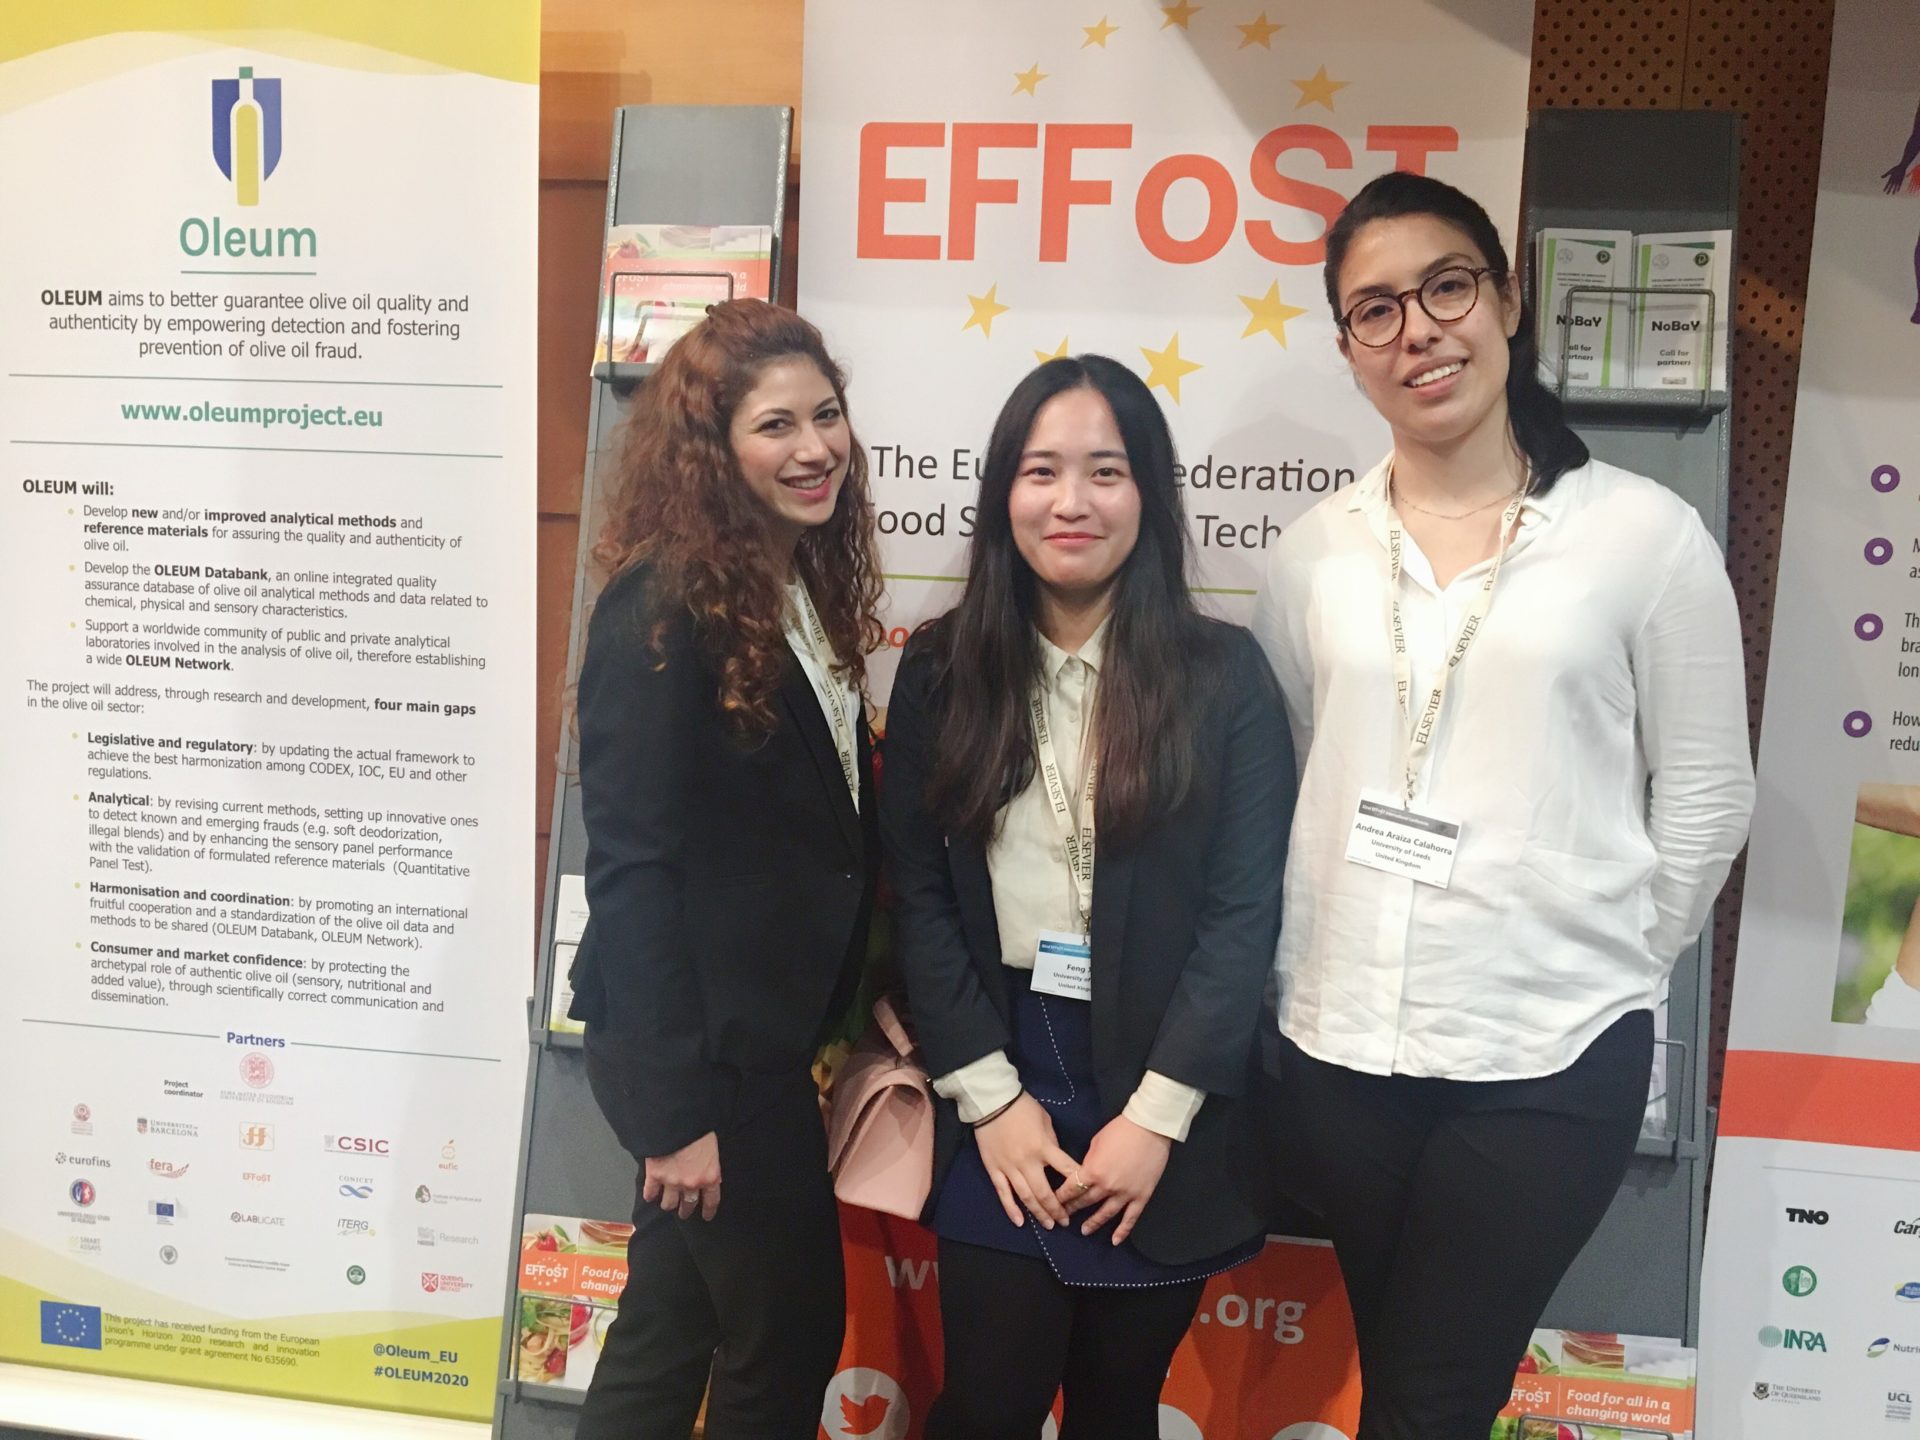 Representation at the 32nd EFFoST Conference, Nantes, France